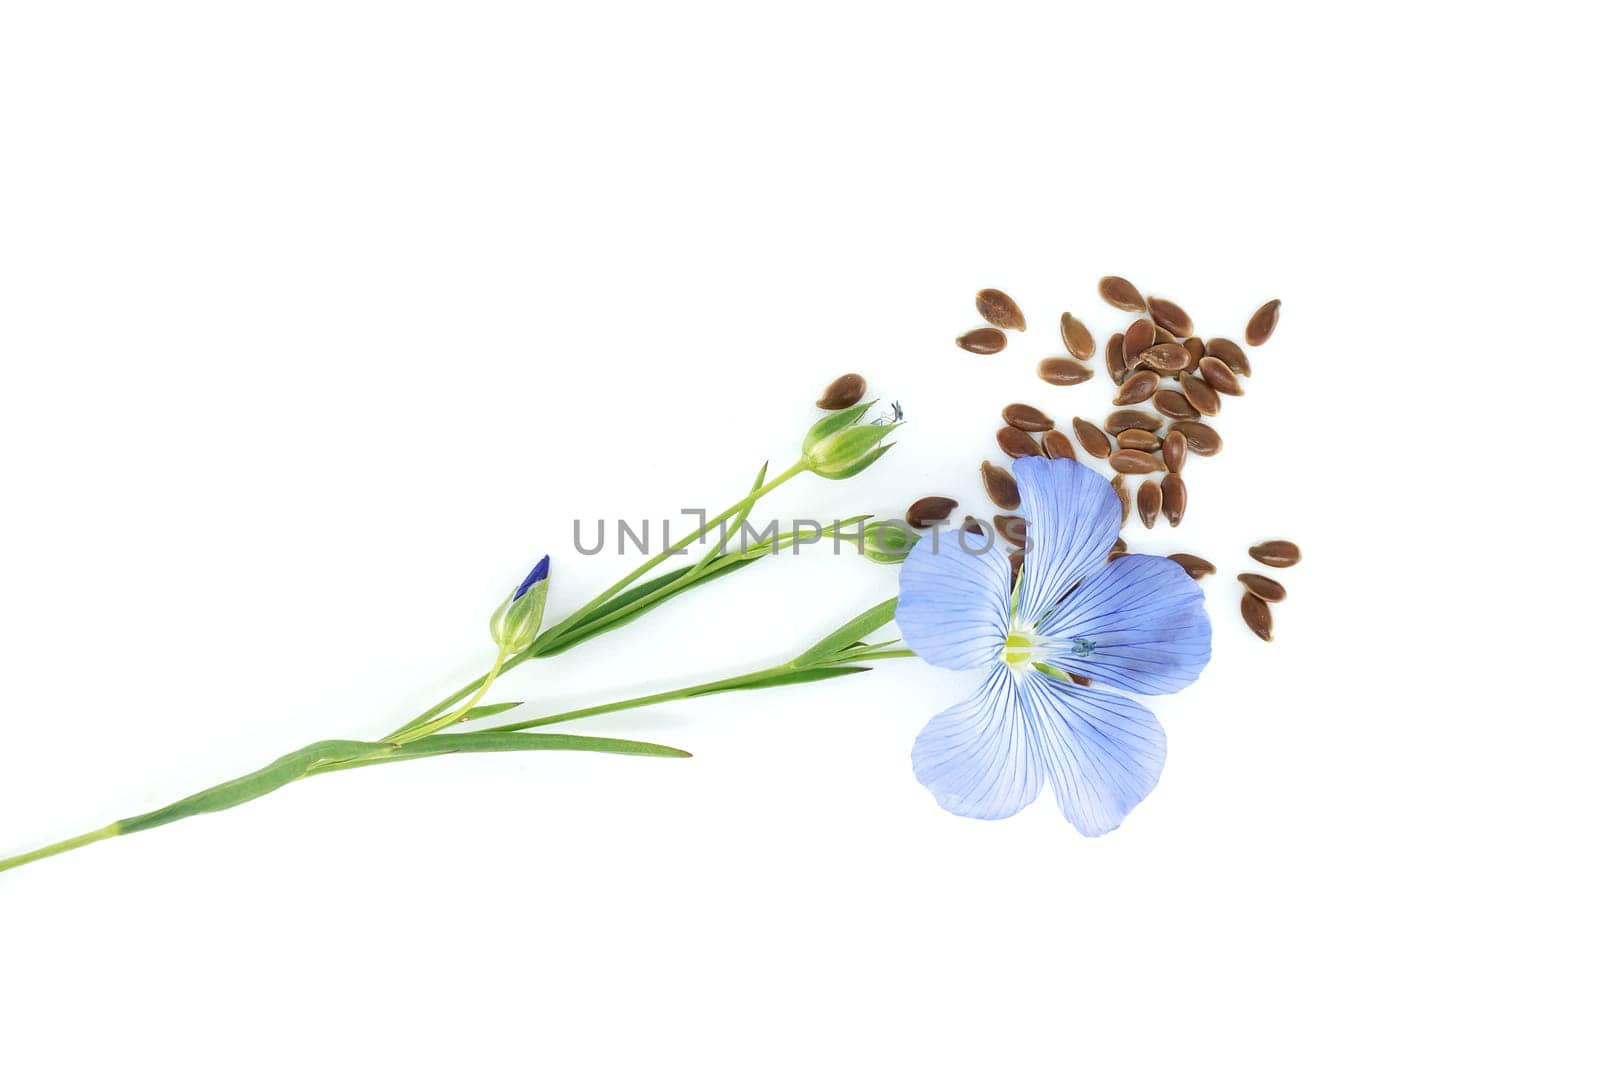 Stems of flowering flax, linseed seeds and flax fruit round capsules isolated on white background. Linum usitatissimum or Common Flax